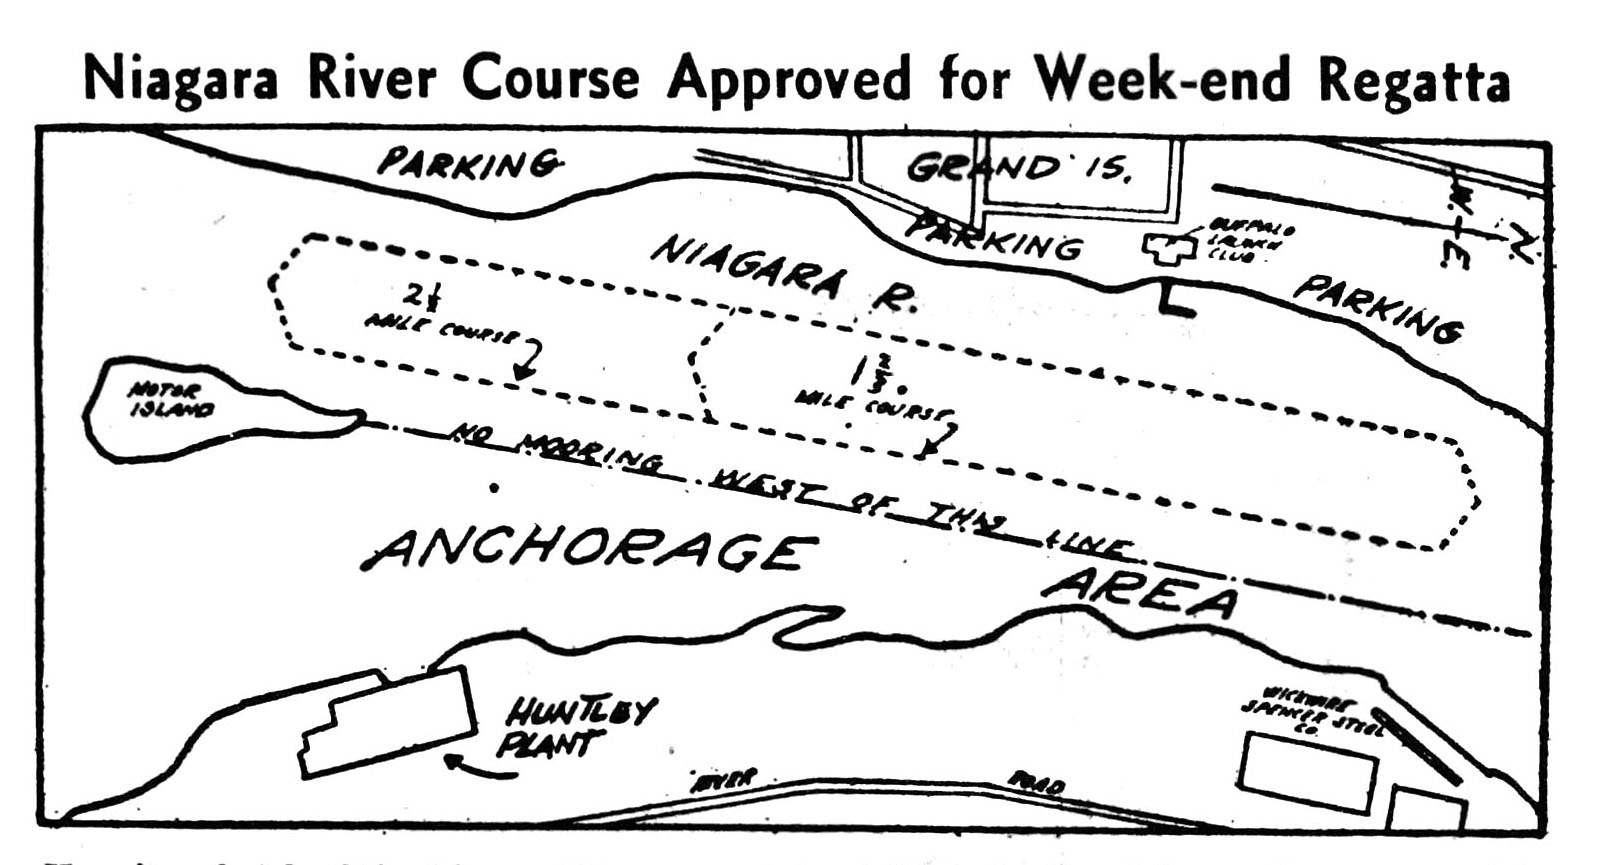 Here is a sketch of the Niagara River course